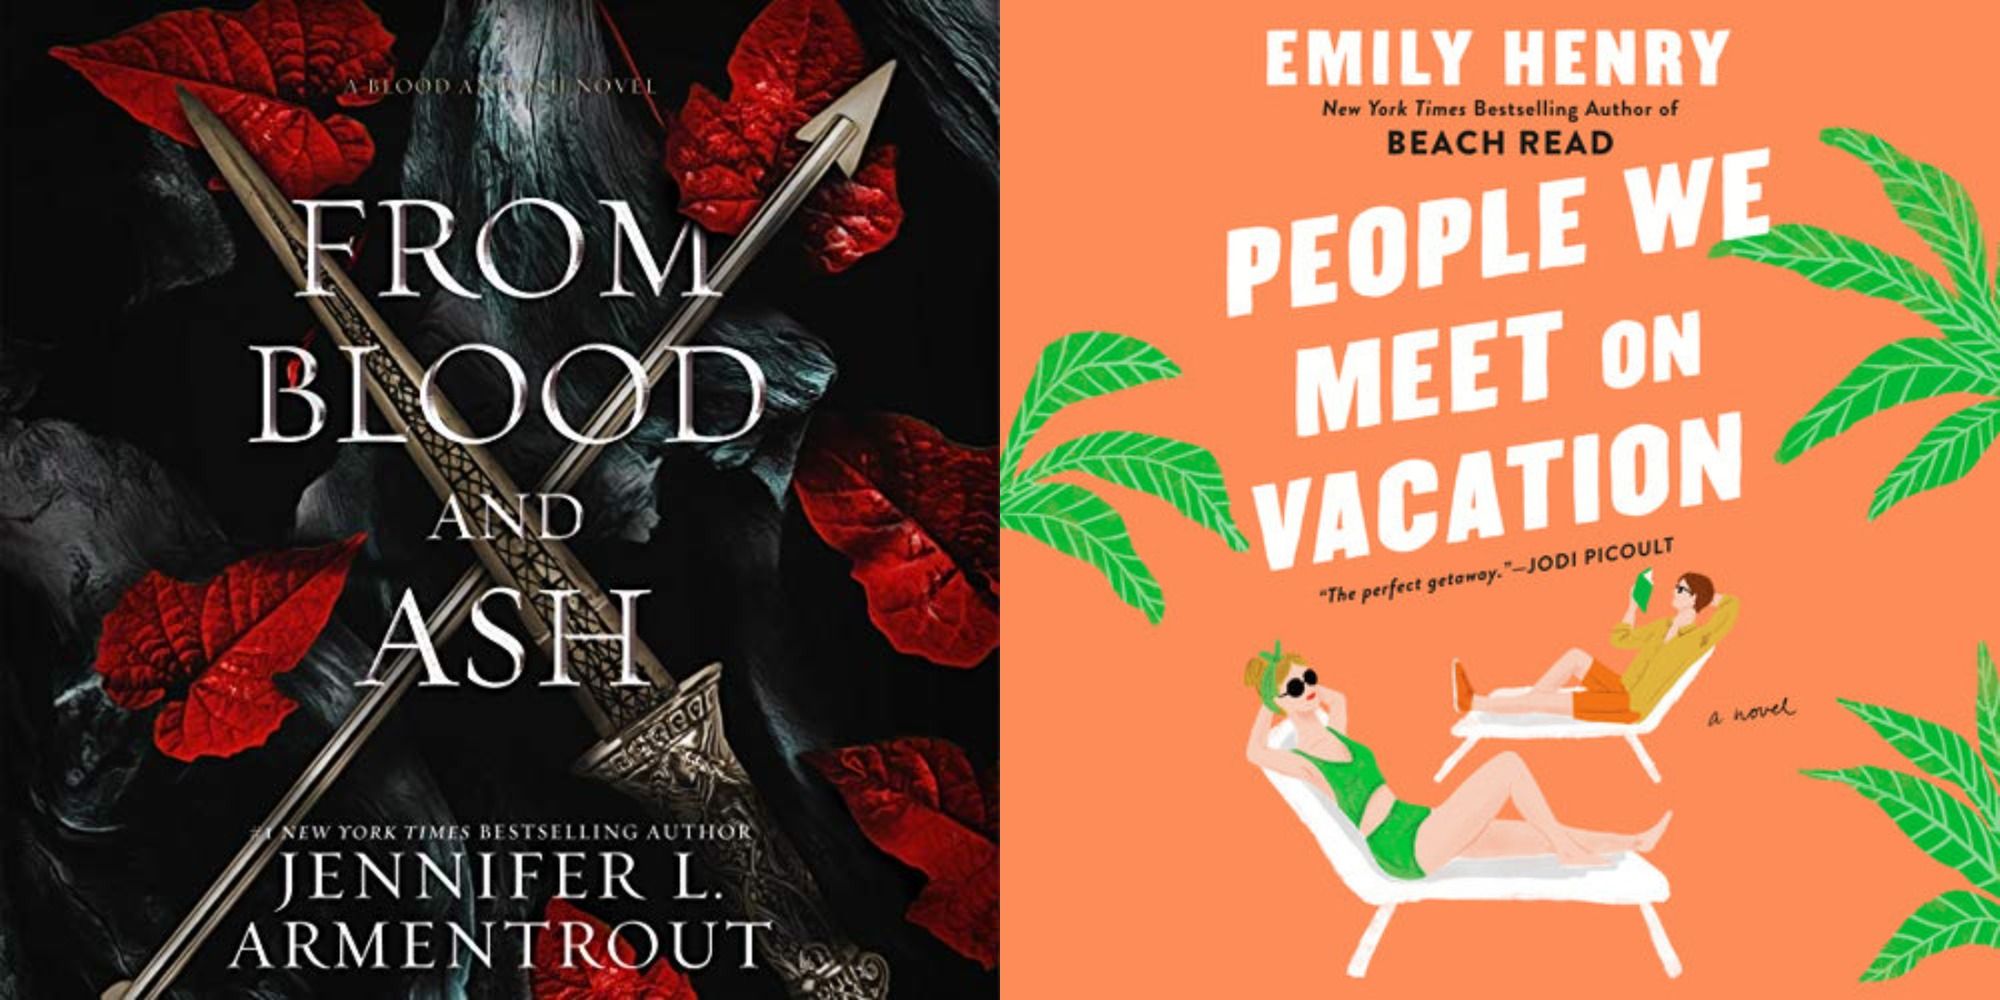 Split image showing the covers of From Blood and Ash, and People You Meet on Vacation